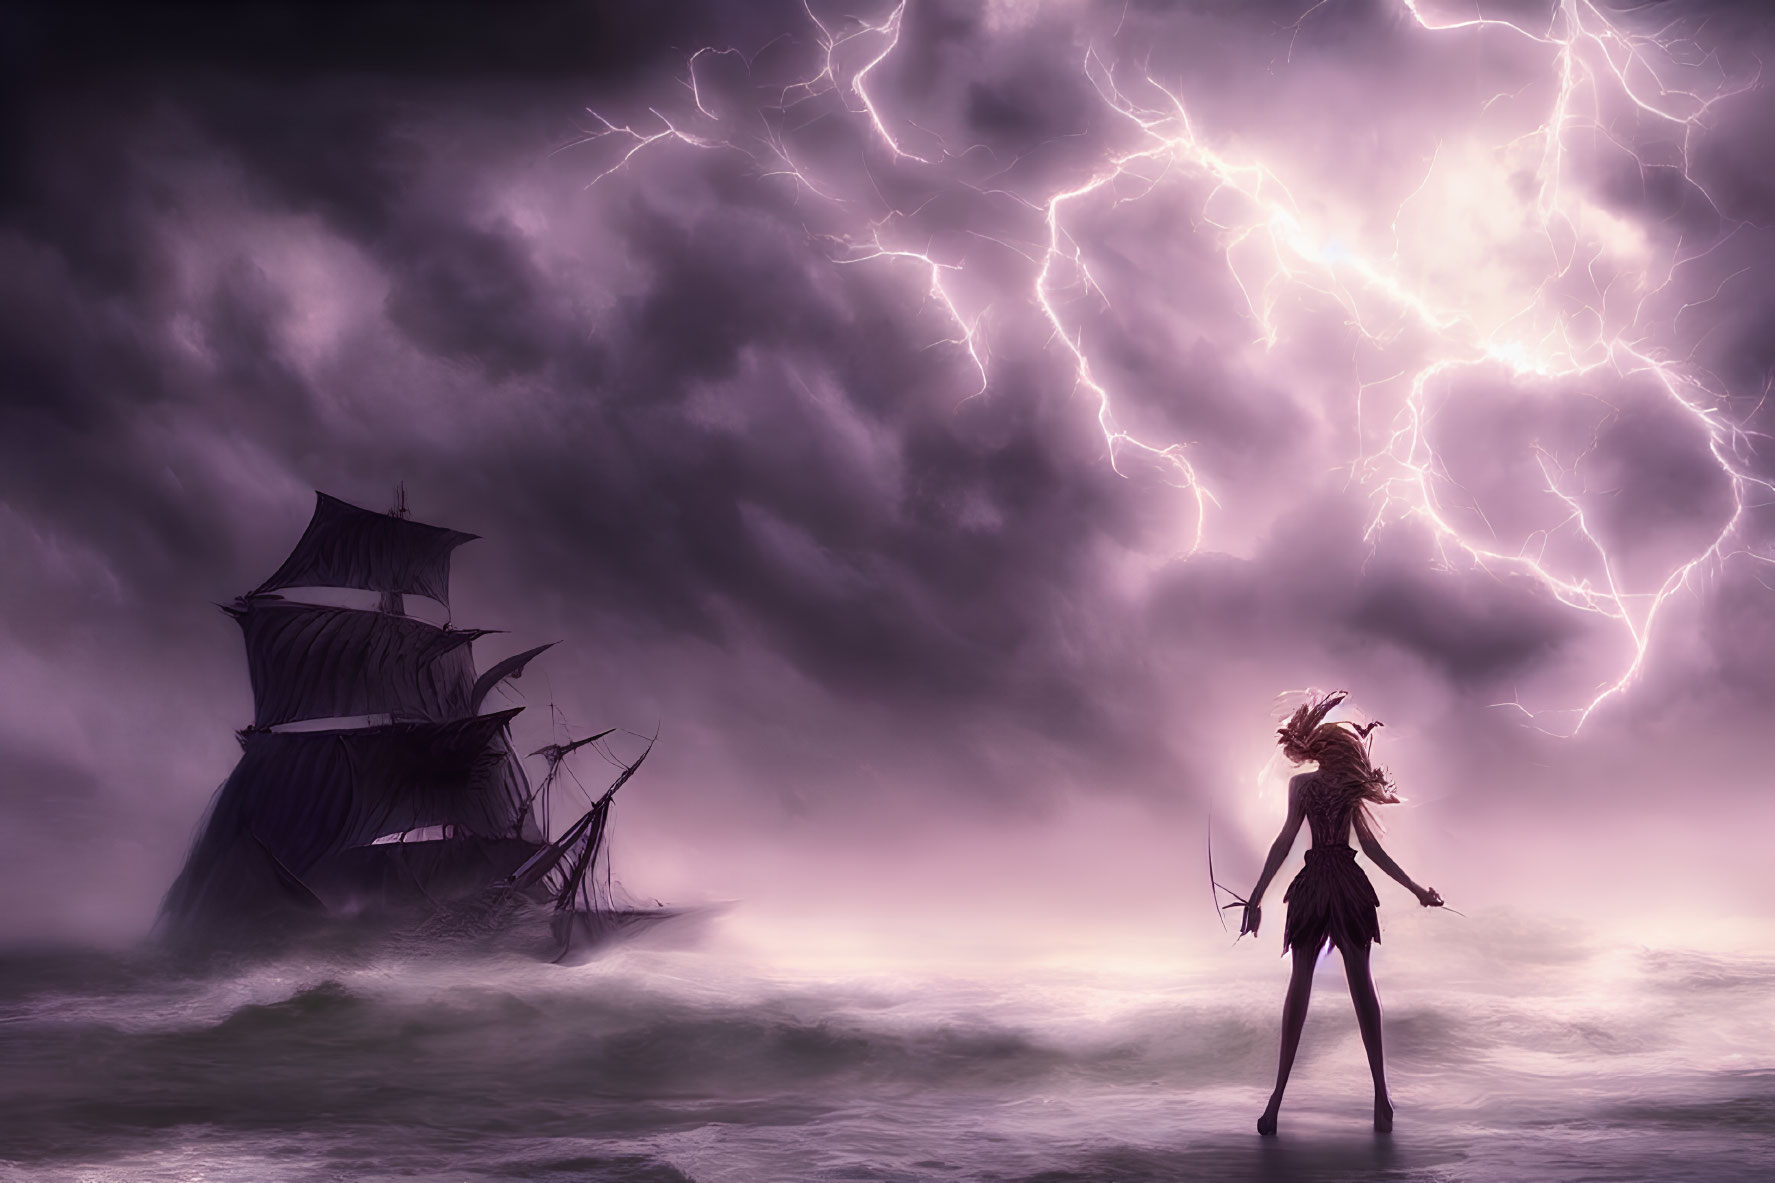 Figure on shore under dramatic sky with lightning and tall ship in tumultuous seas